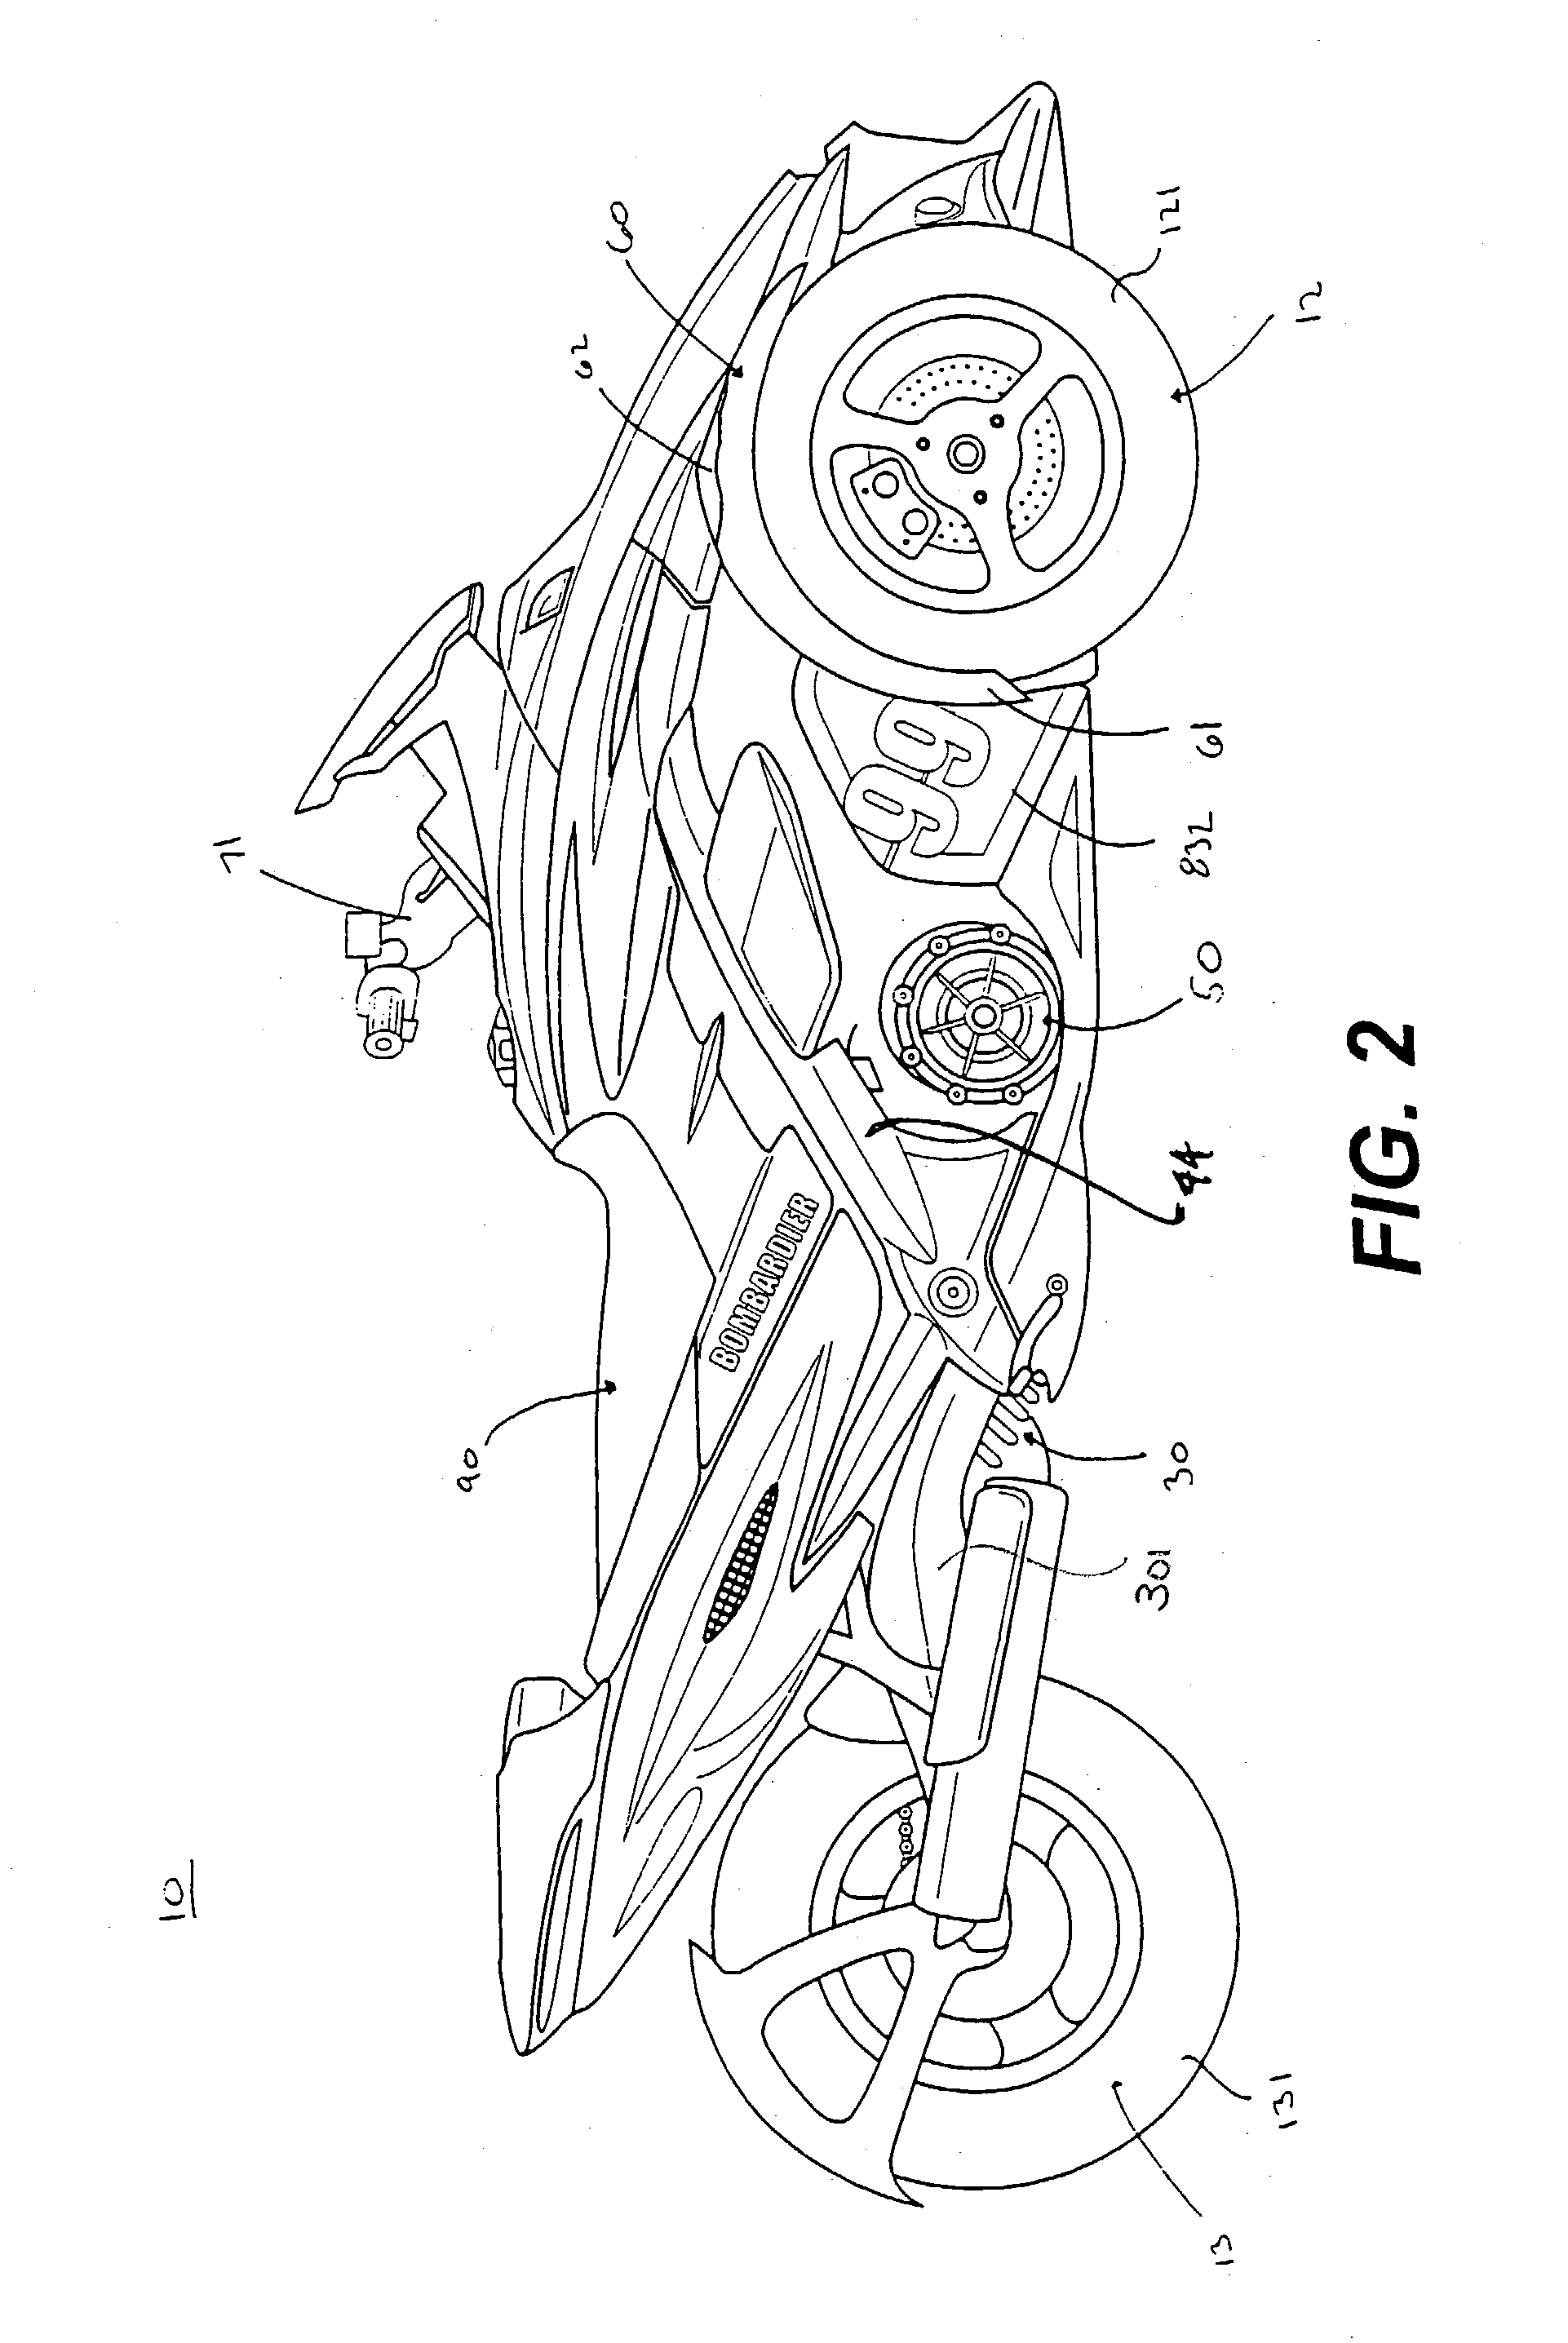 Three-wheeled vehicle with a continuously variable transmission